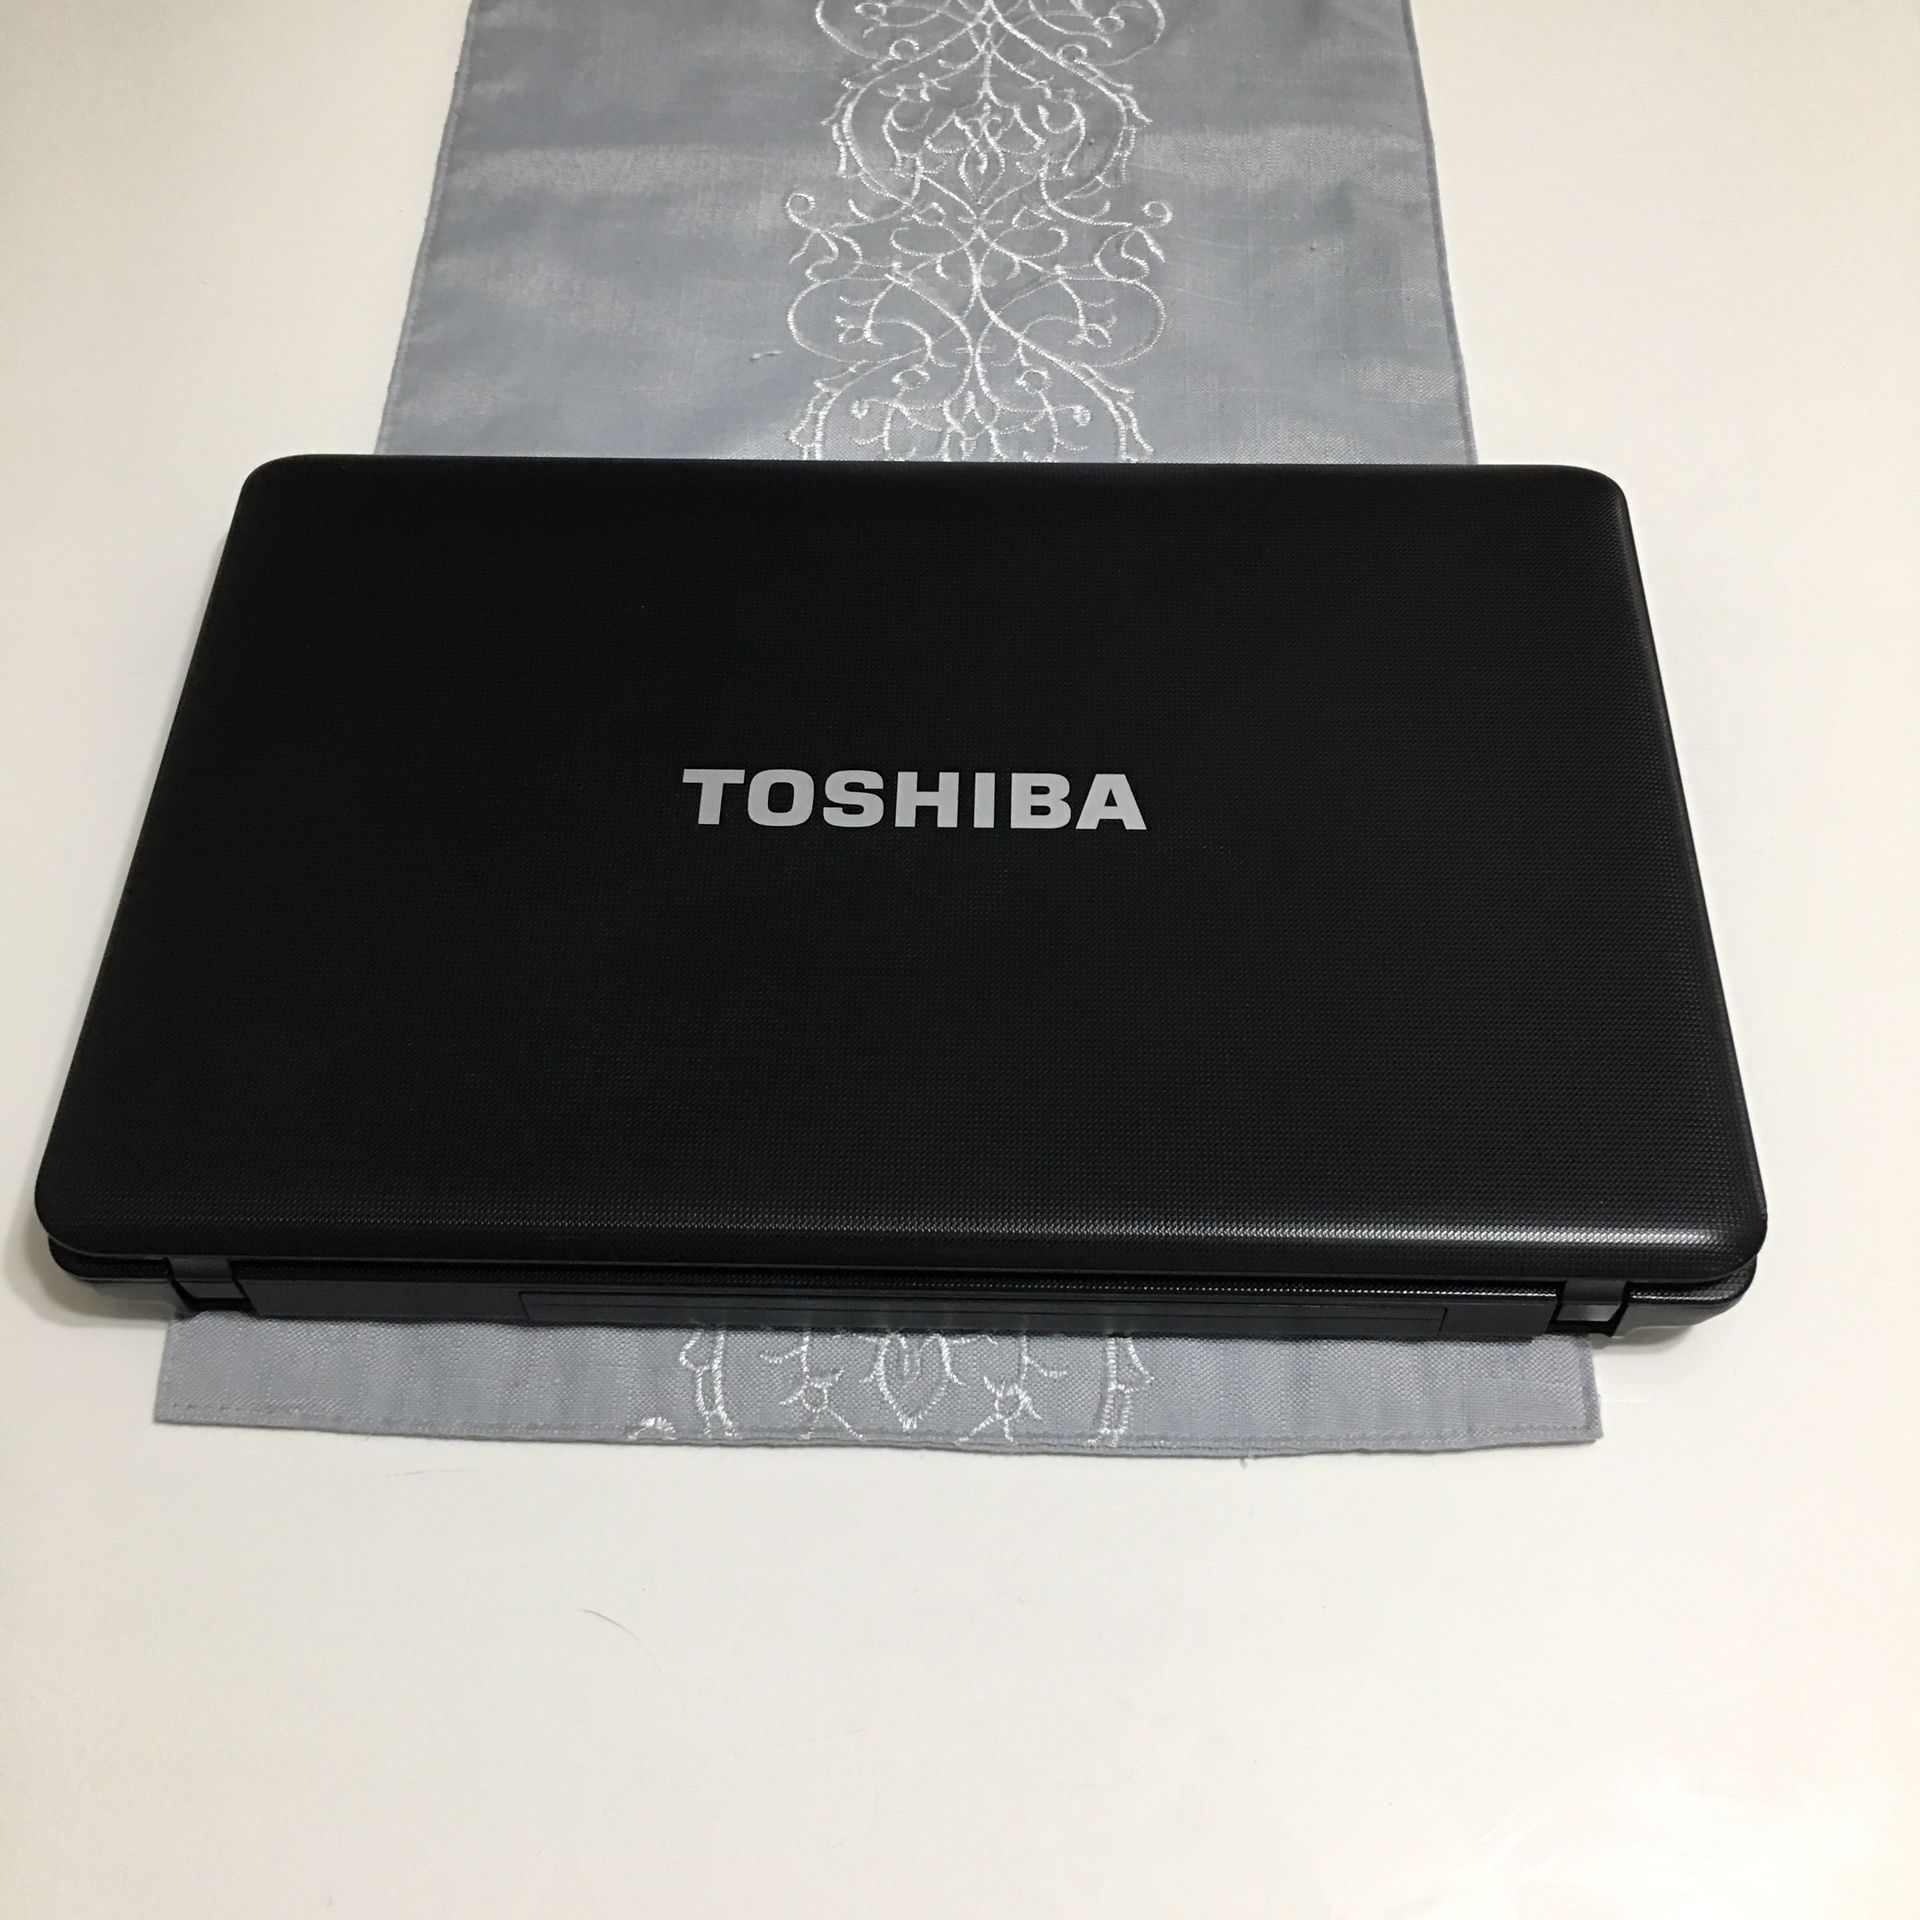 Toshiba satellite laptop barely used, great condition